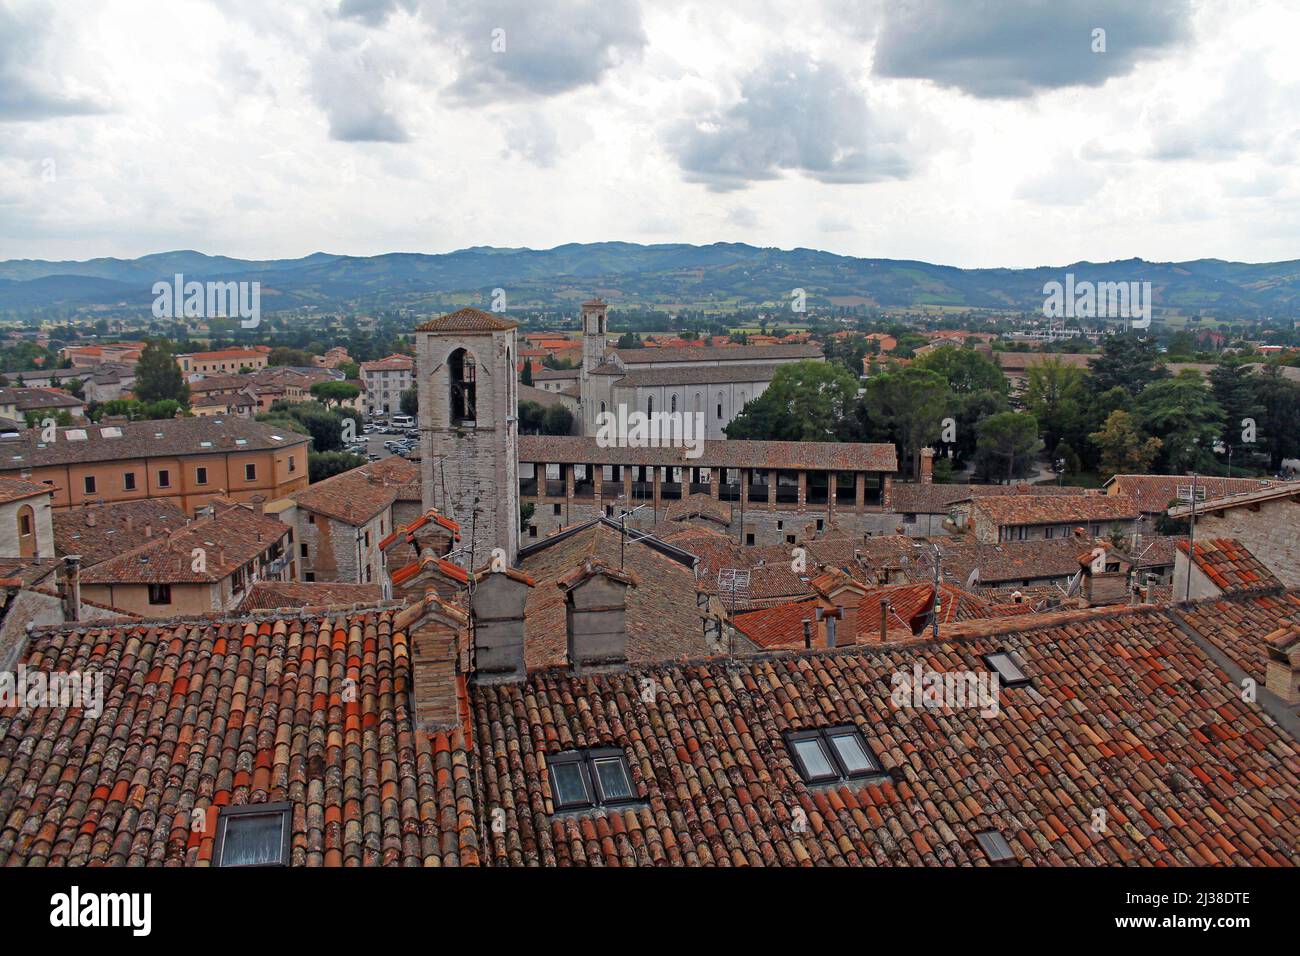 The traditional roves of Gubbio during a cloudy day in Umbria in Italy Stock Photo